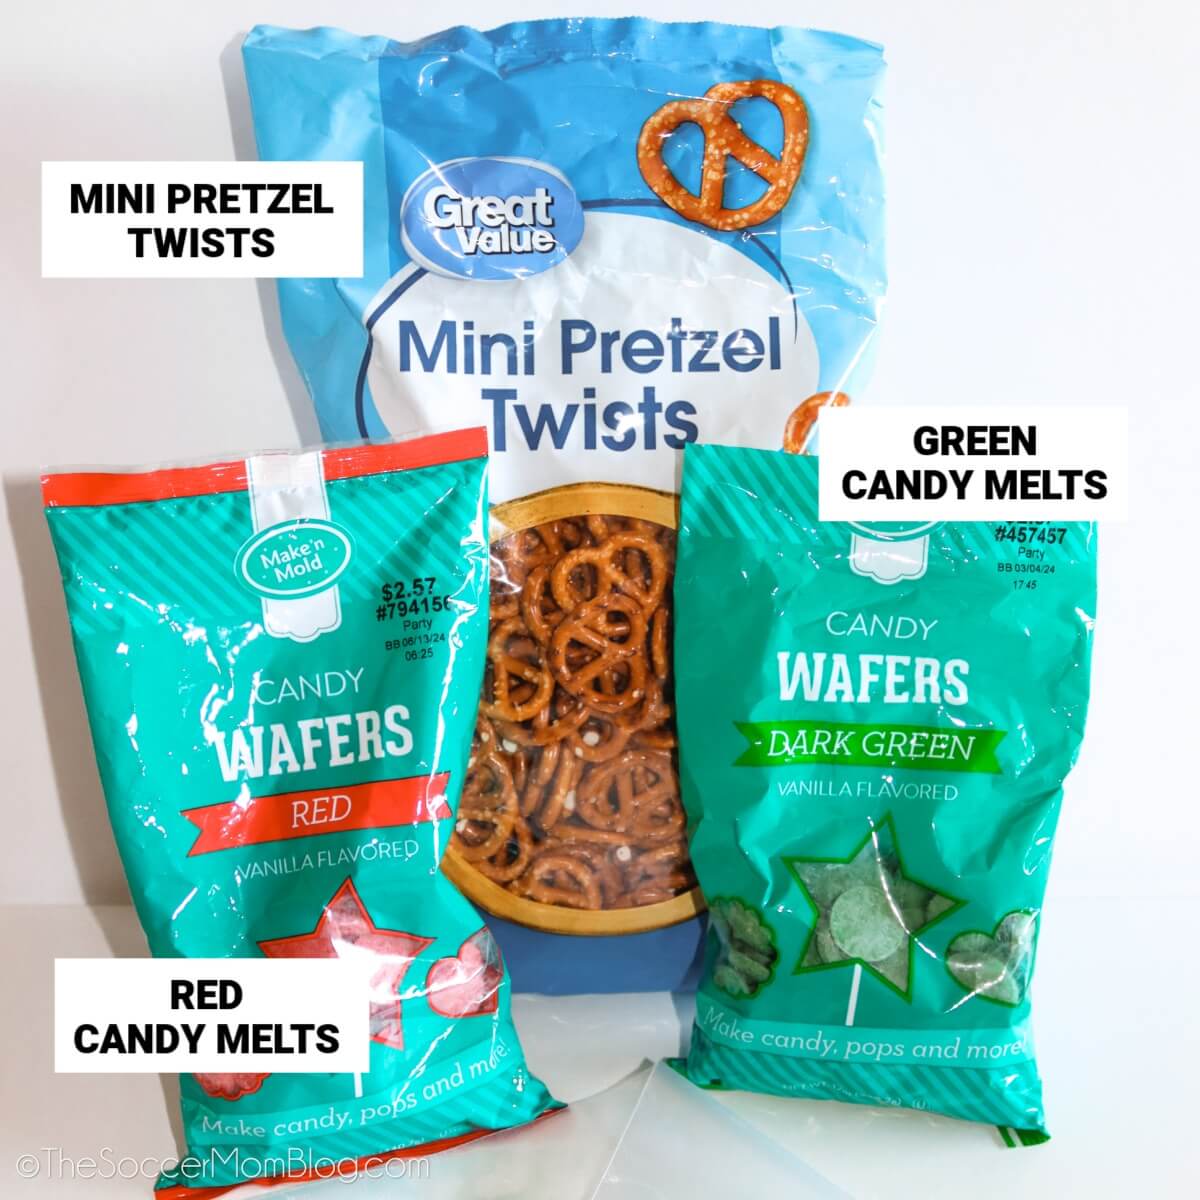 Grinch pretzel ingredients, with text labels: mini pretzel twists, green candy melts, red candy melts.